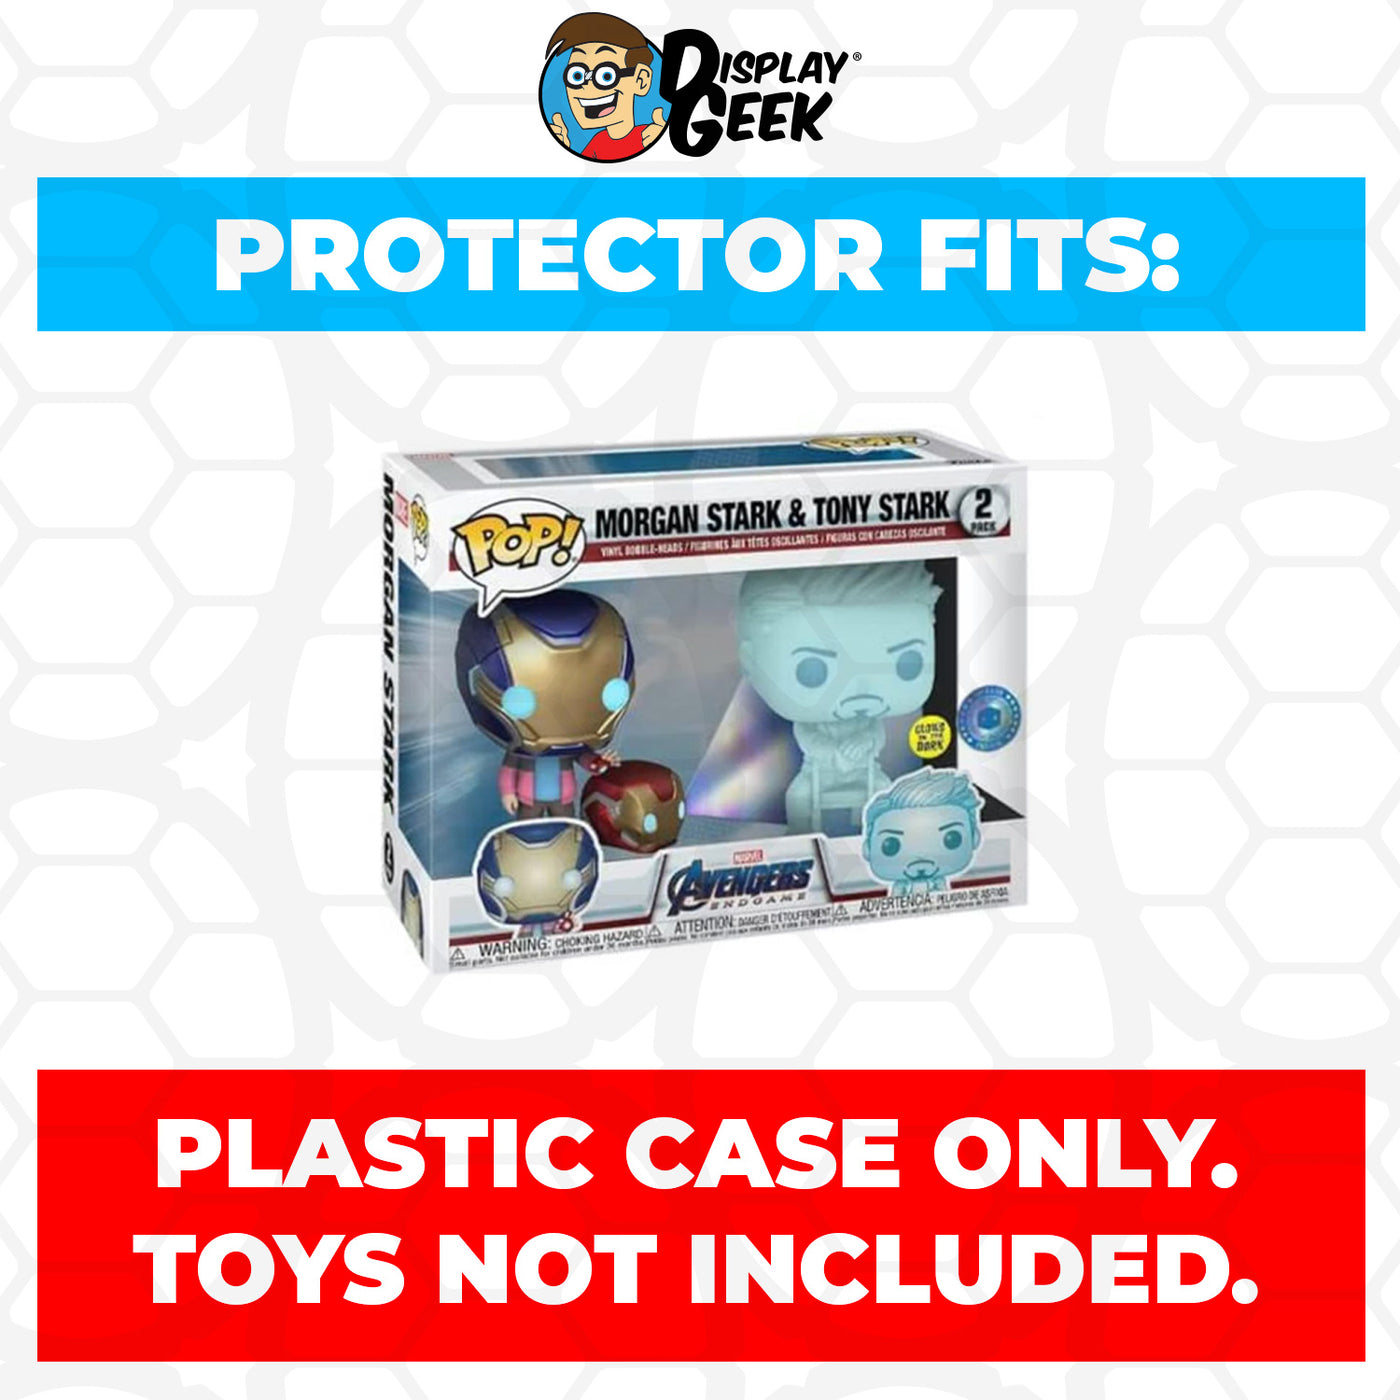 Pop Protector for 2 Pack Morgan Stark & Tony Stark Glow Funko Pop on The Protector Guide App by Display Geek